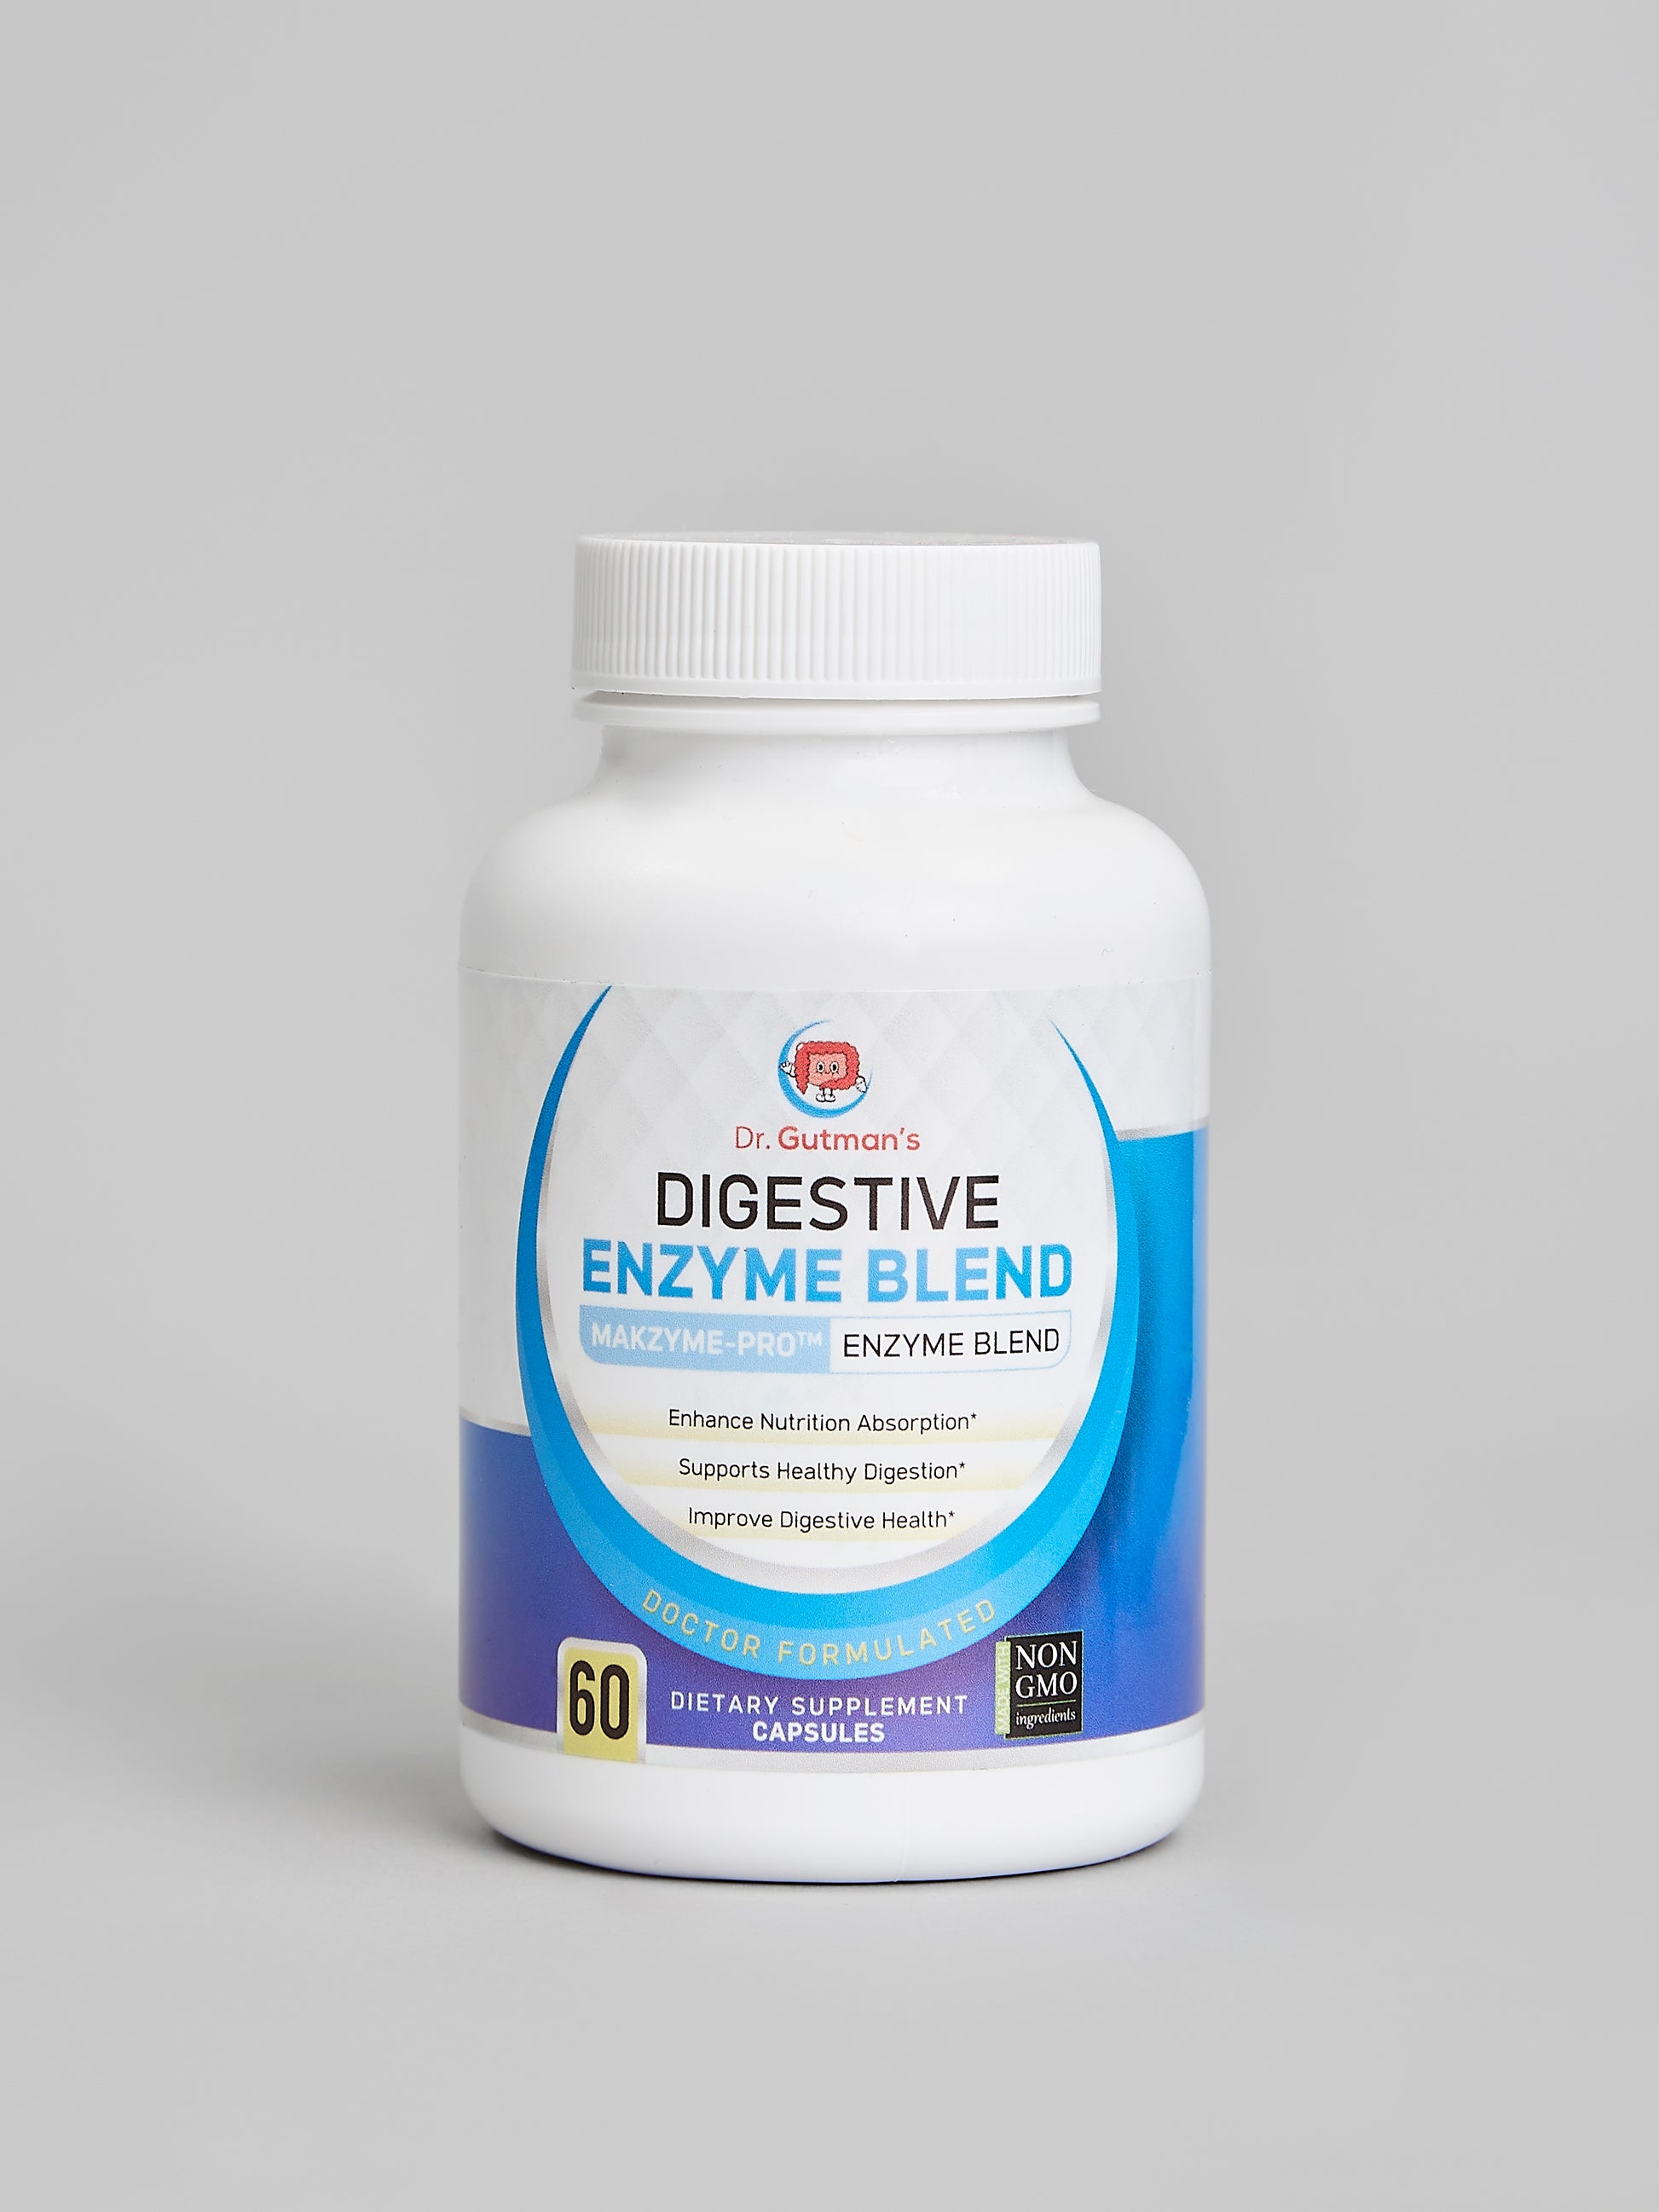 Best Digestive Enzyme Supplements